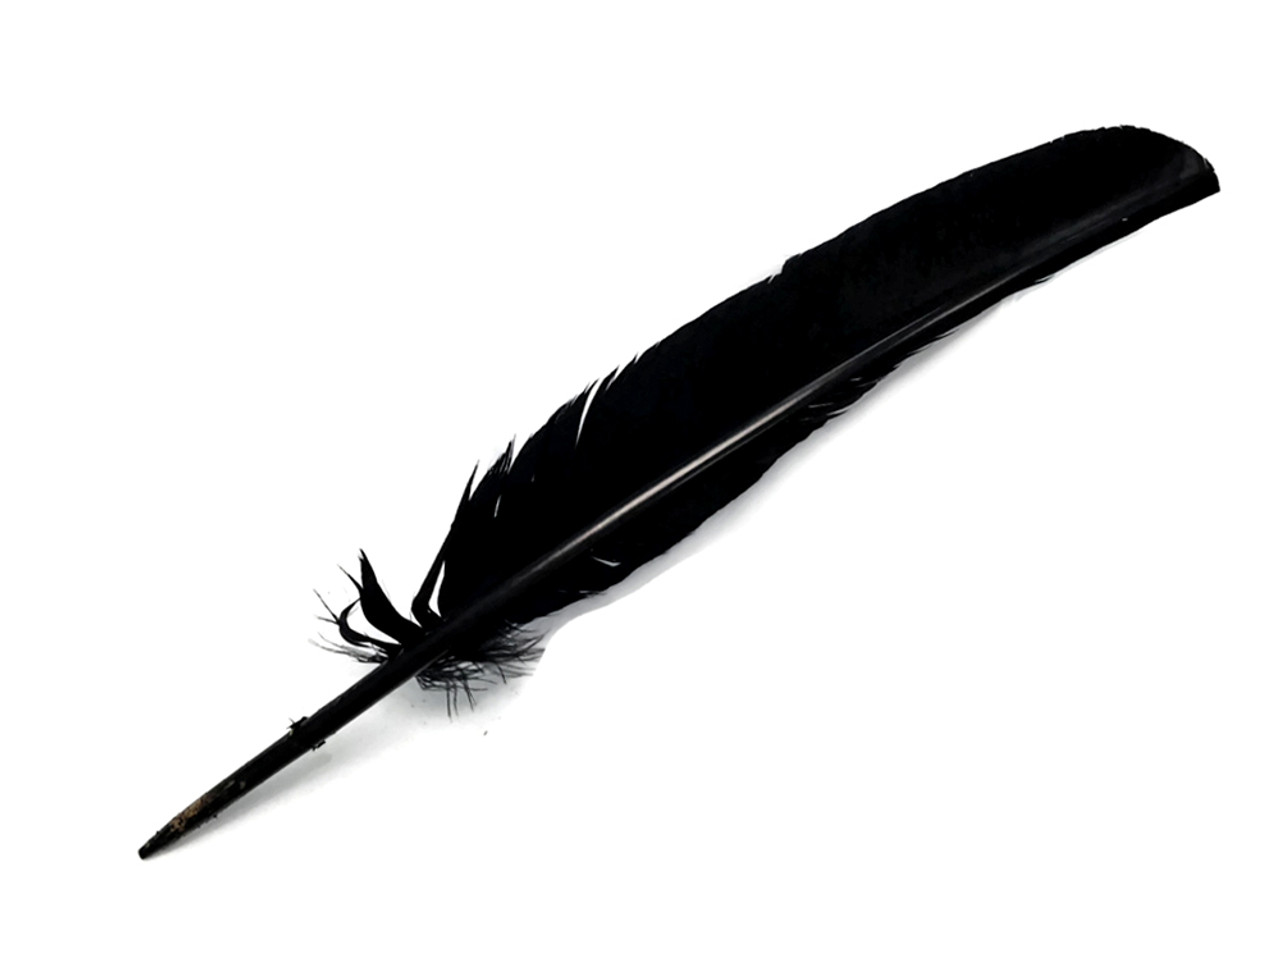 wholesale feather quill pen and ink